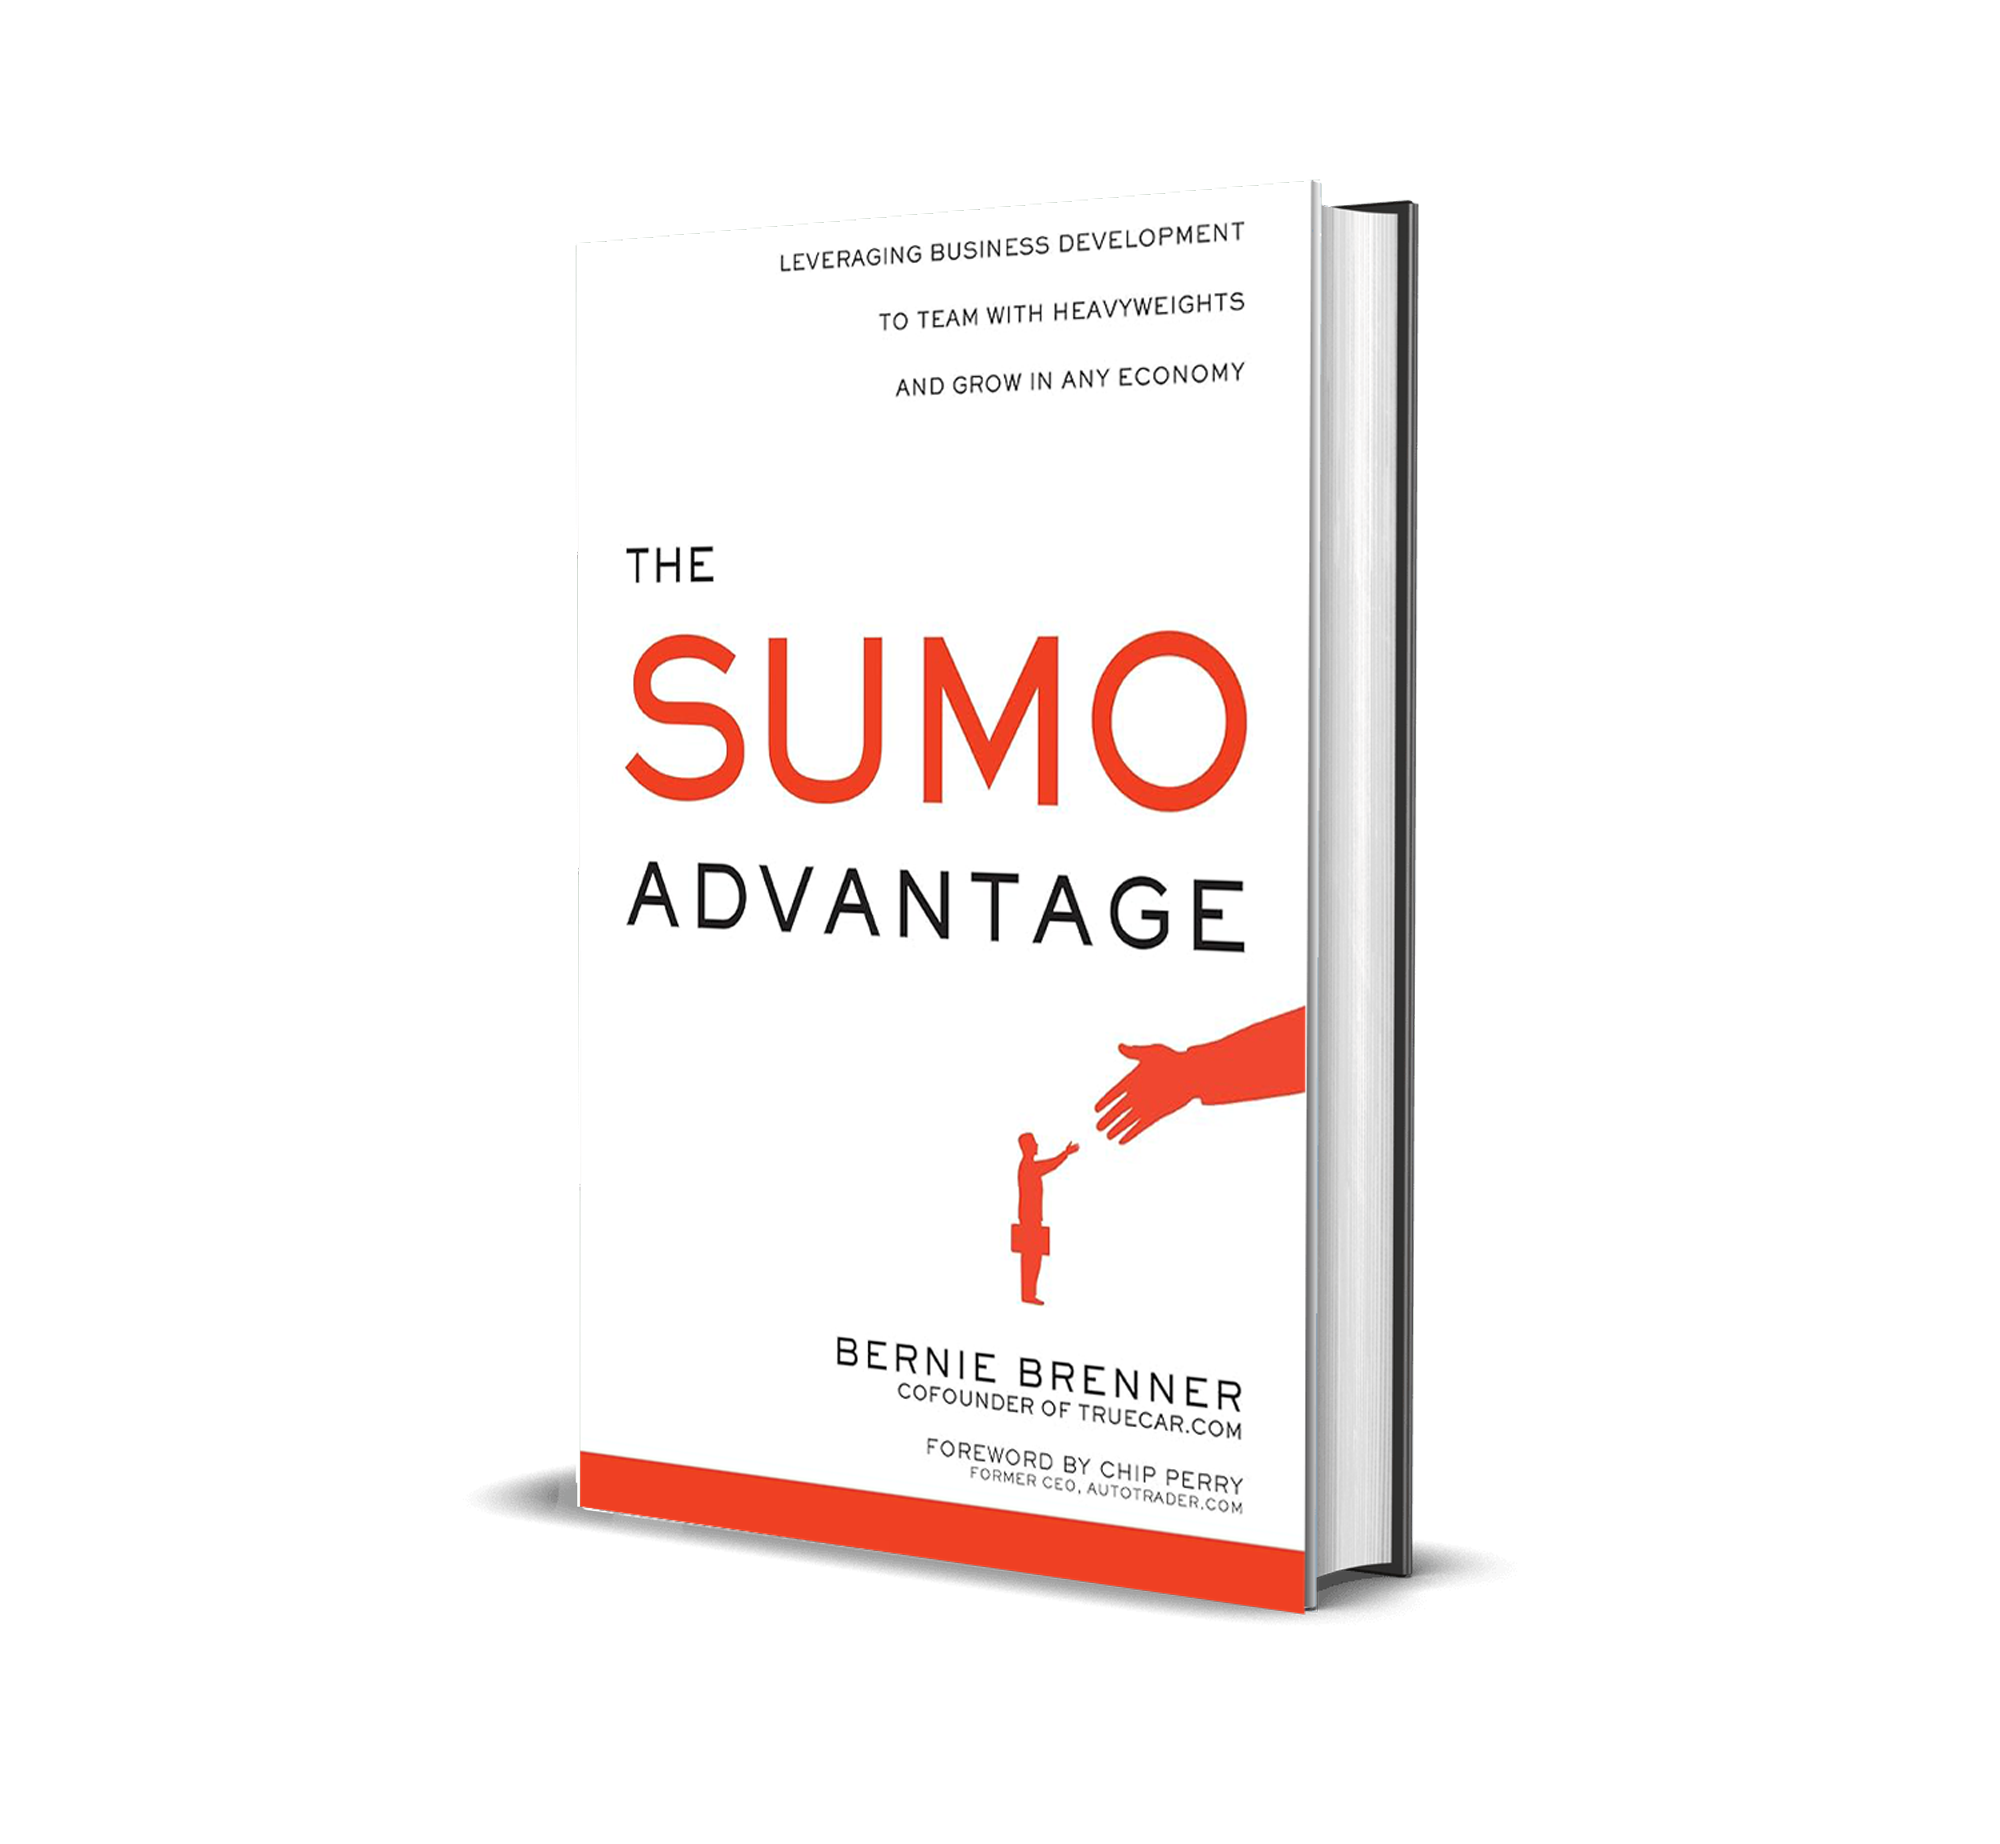 A hard copy of The Sumo Advantage by Bernie Brenner